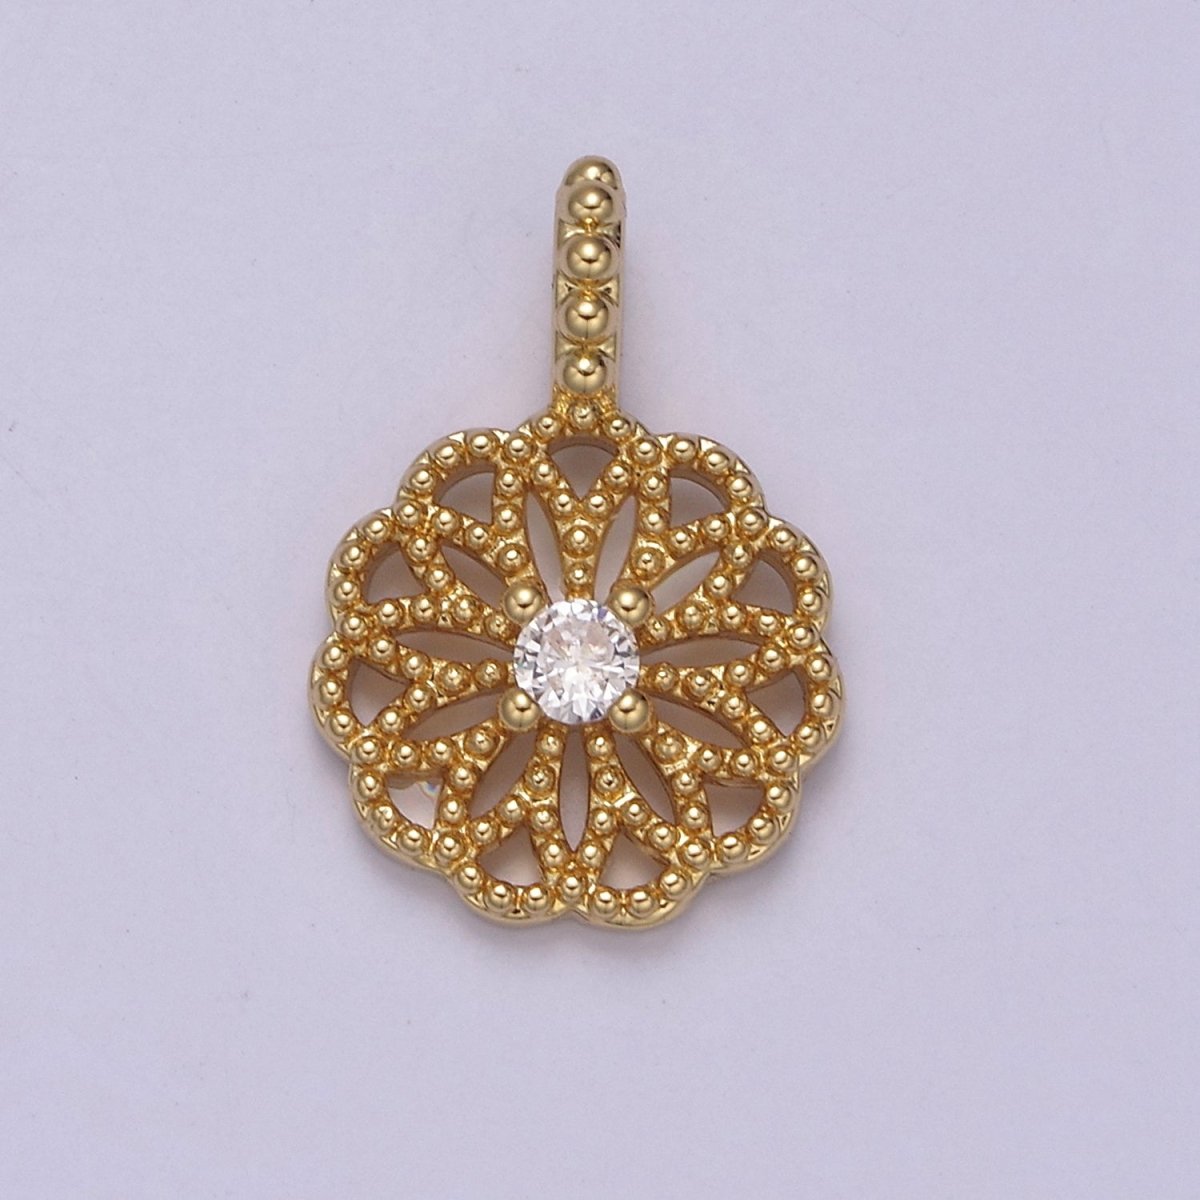 24K Gold Filled Floral Beaded Pendant with Clear CZ in the center for Minimalist Jewelry I-893 - DLUXCA